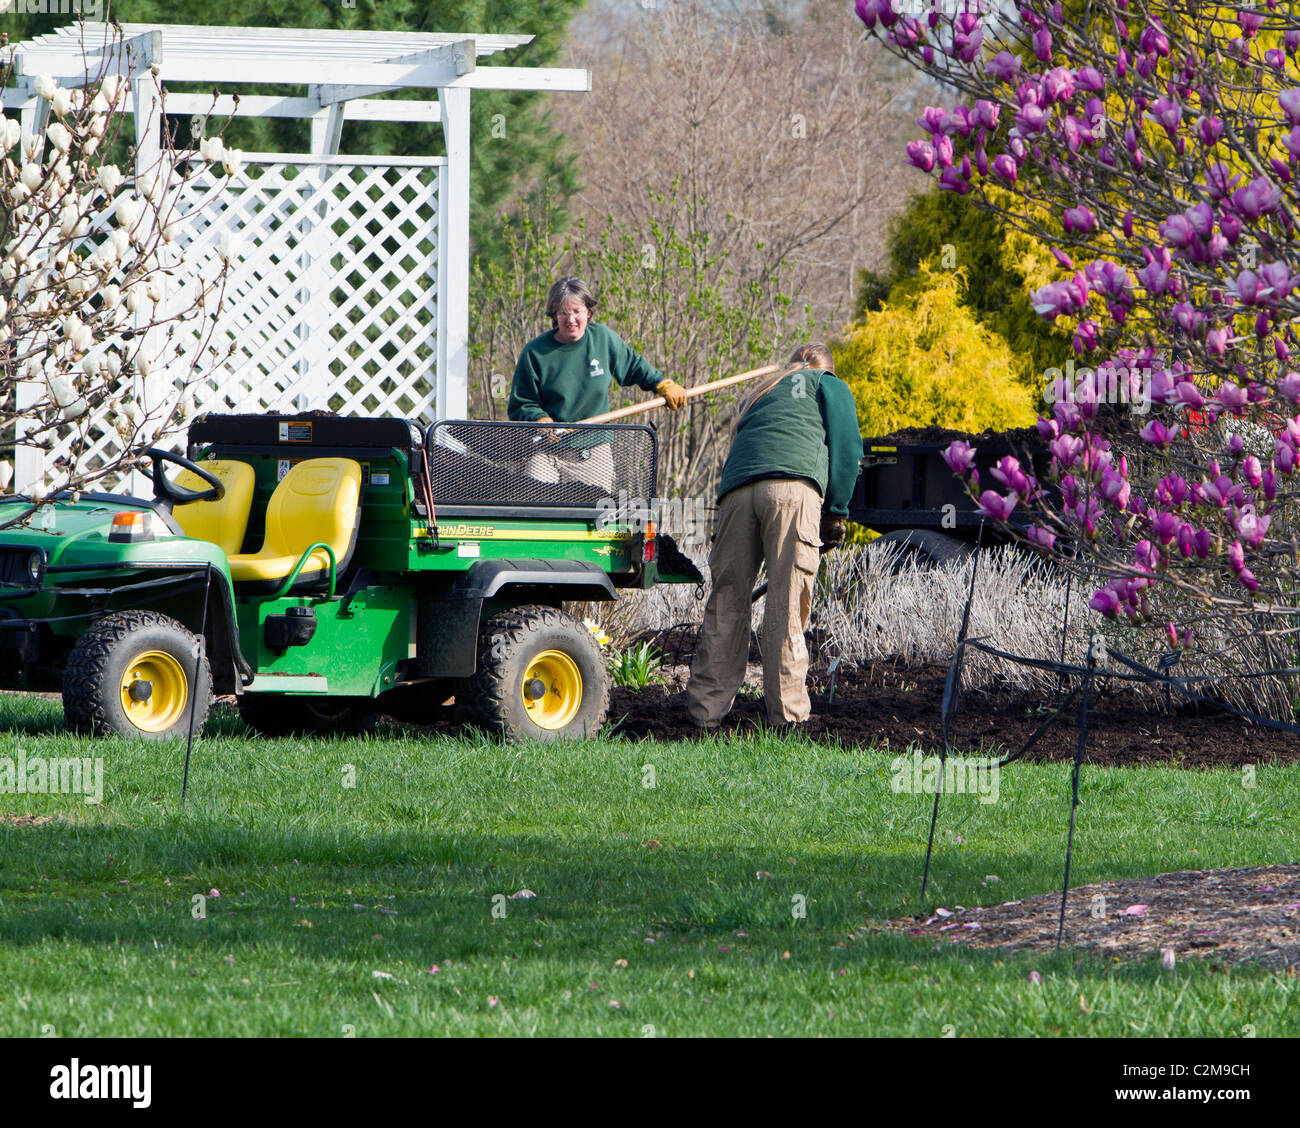 Spreading mulch in the garden with a John Deere Gator TX and a pitchfork. Stock Photo